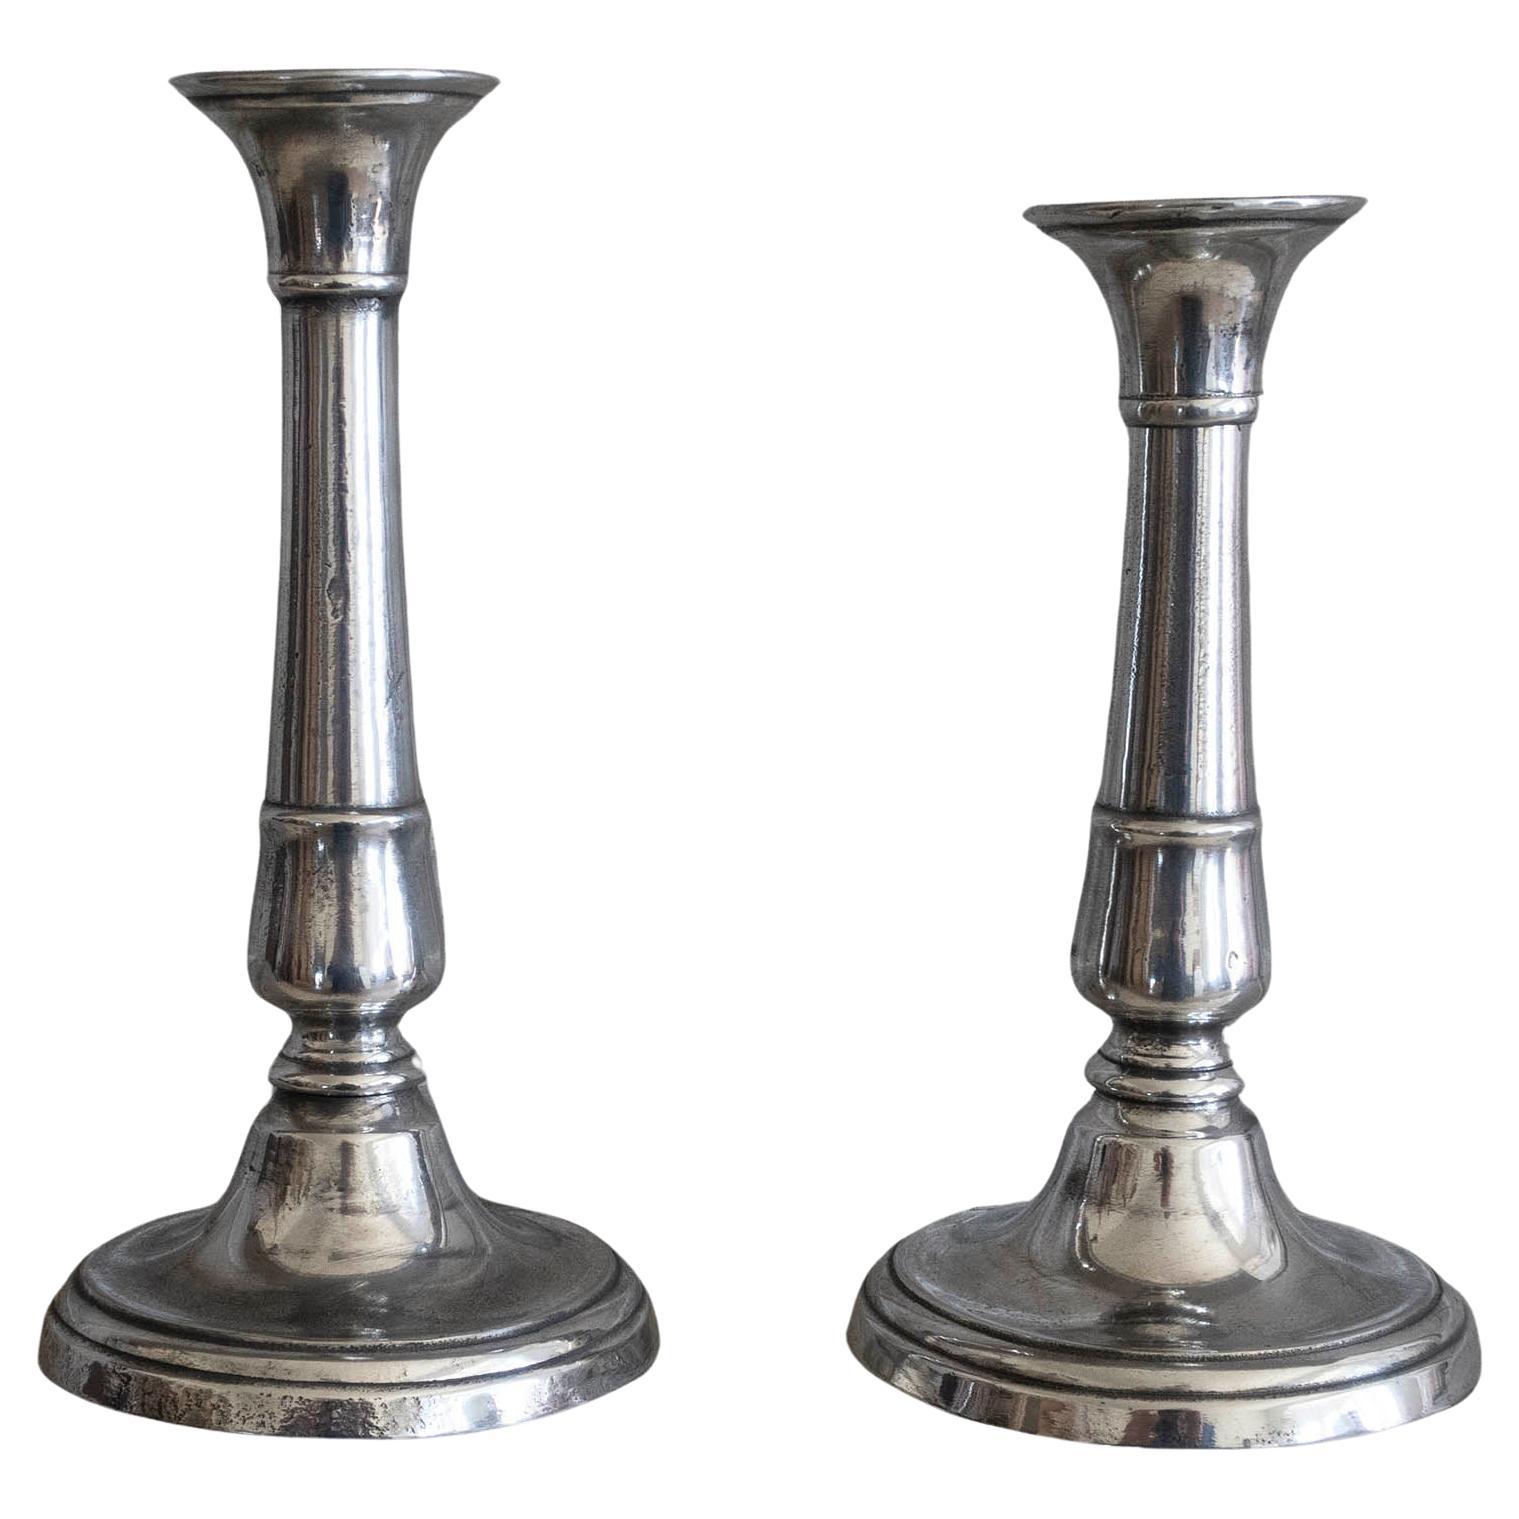 Near Pair of Gustavian Style Pewter Candlesticks, English, C.1800 For Sale